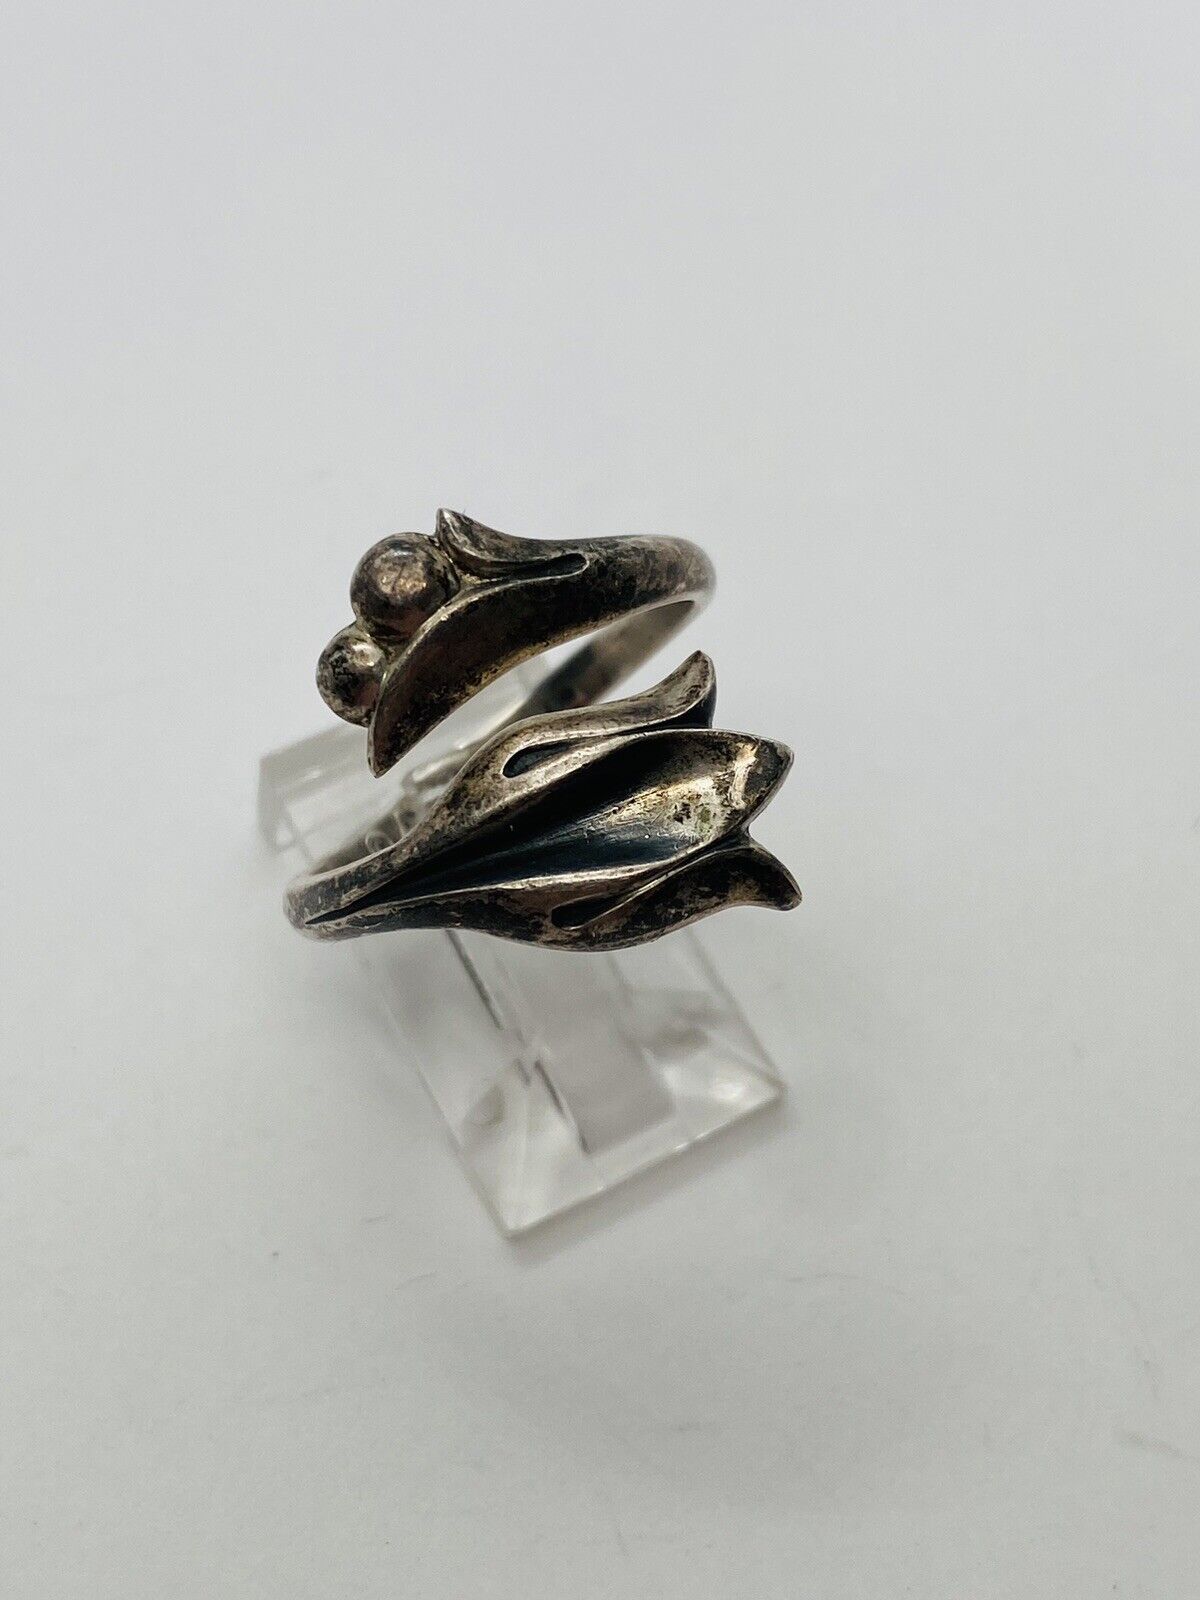 4.1g SIZE 7.5 AVON STERLING SILVER TULIP ANTIQUE BYPASS ADJUSTMENT RING STAMPED